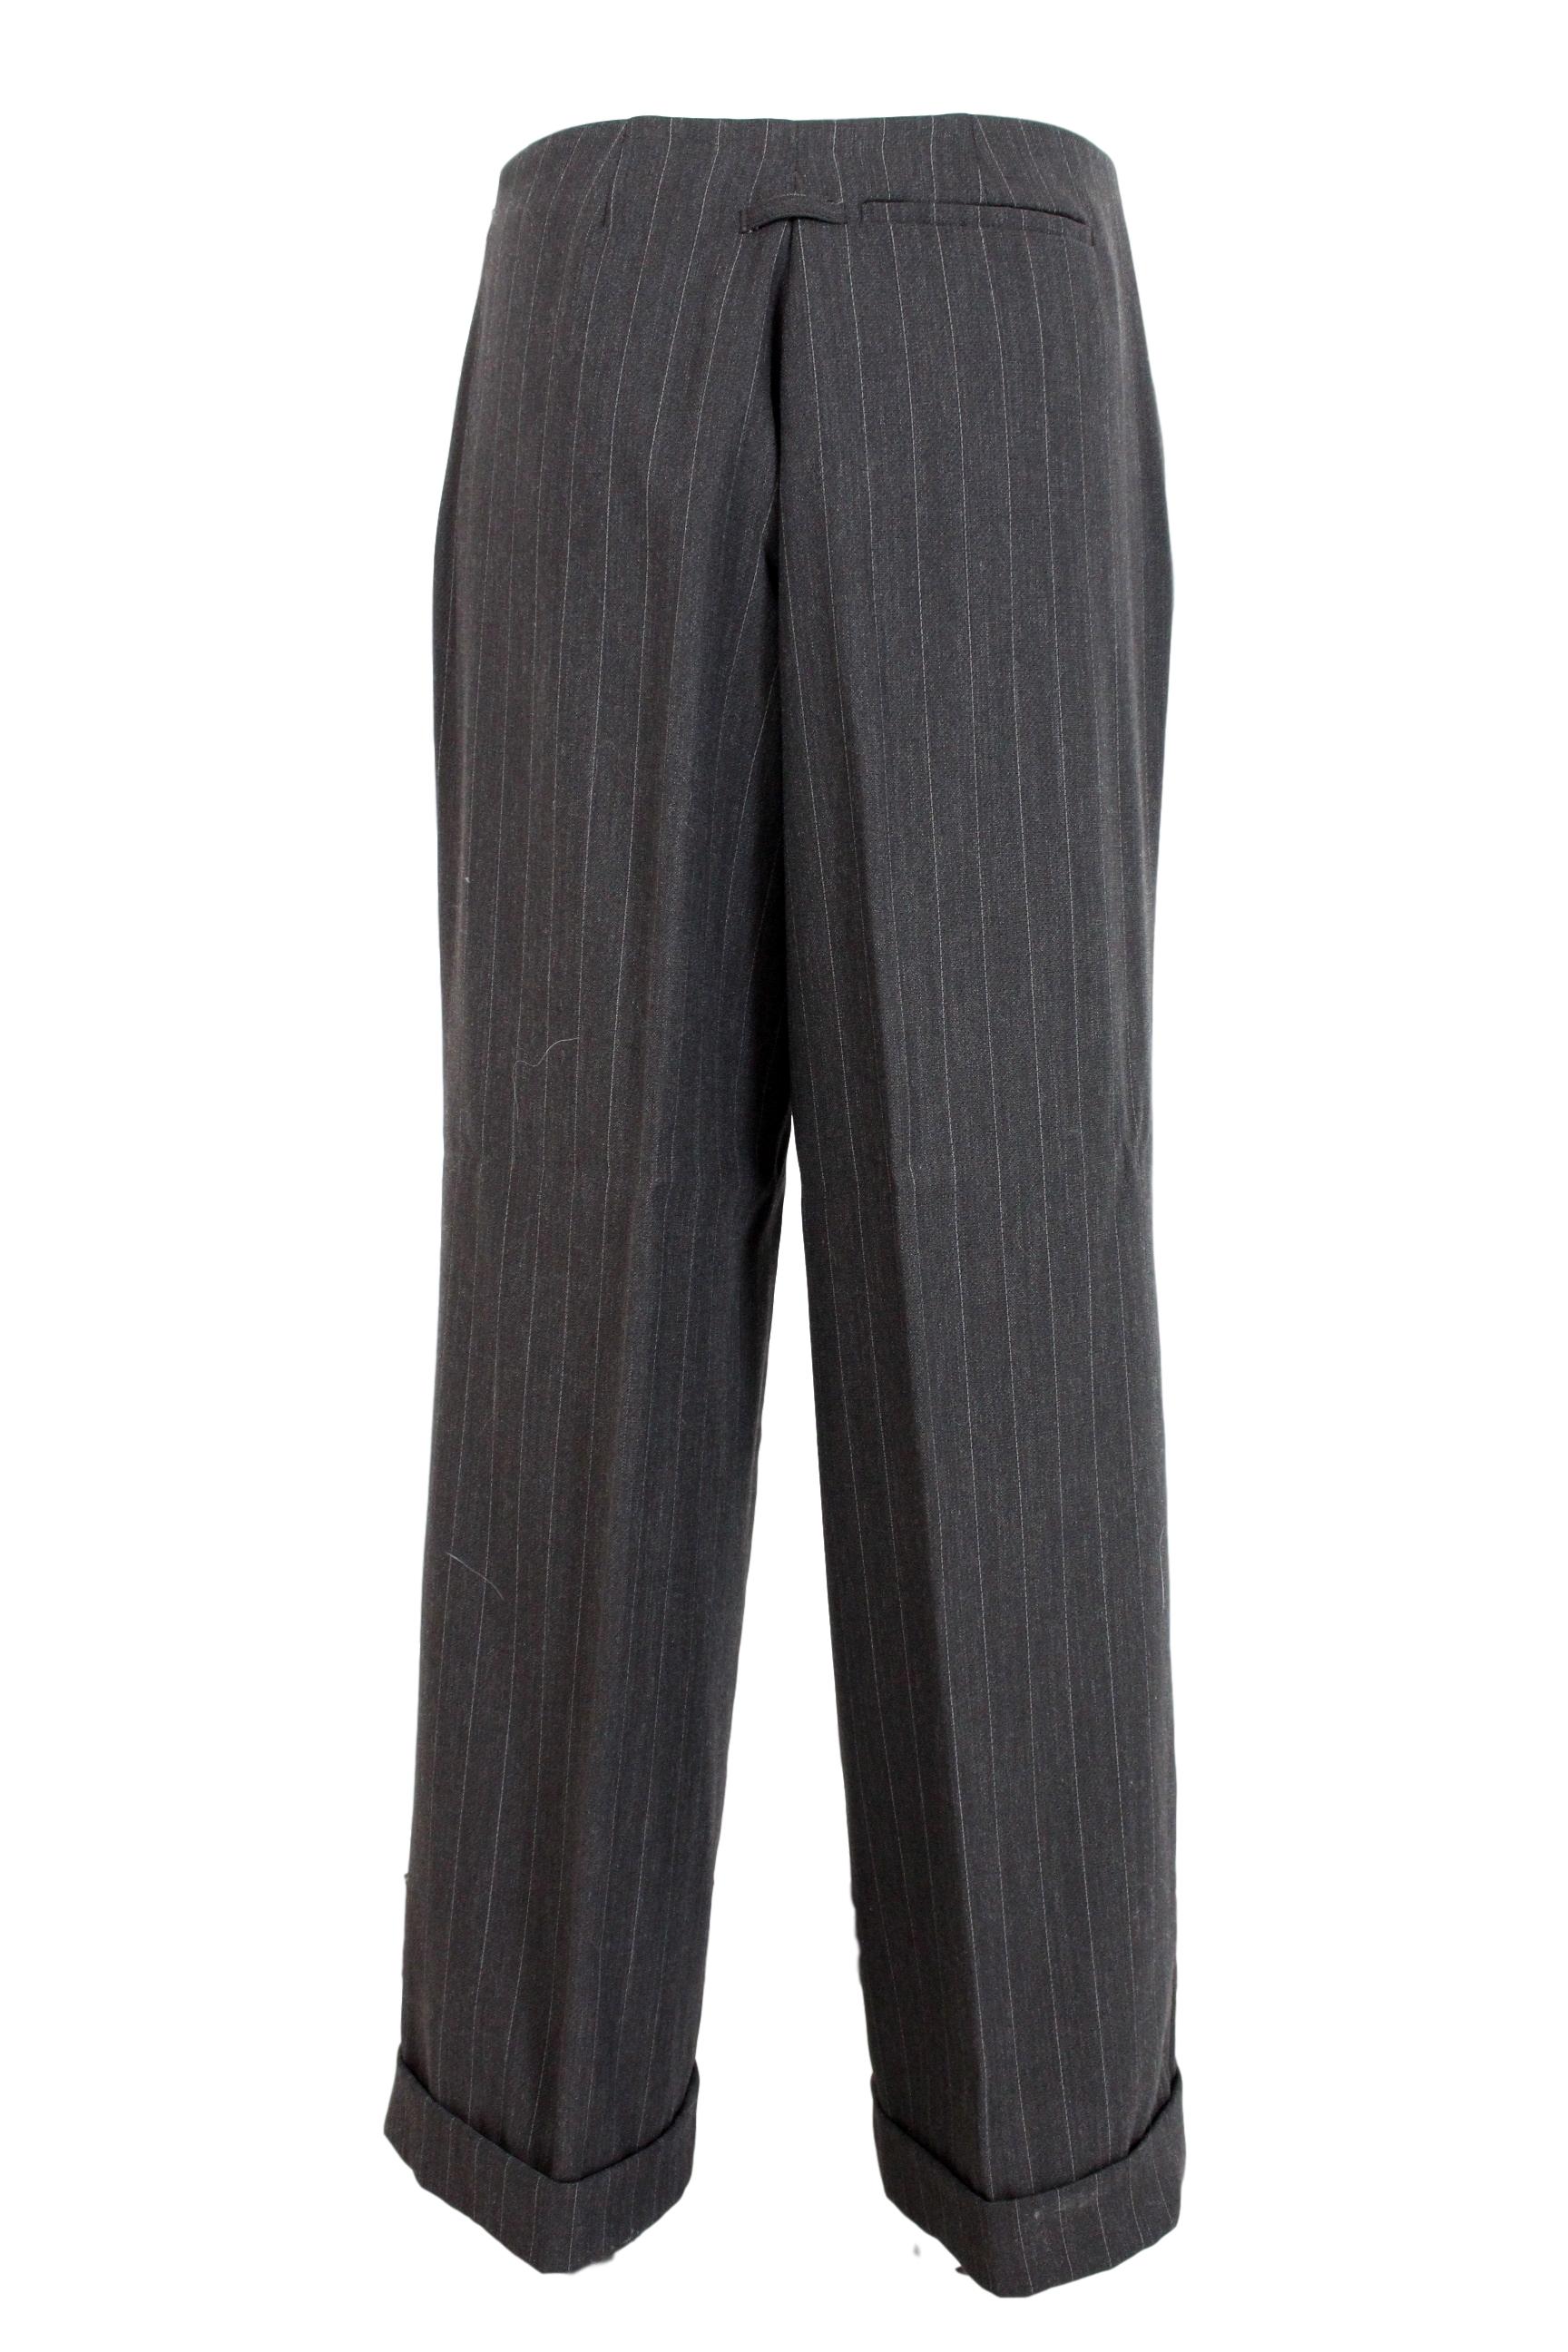 Jean Paul Gaultier Classique 90s vintage women's trousers. Large model with wide leg, high waist. Gray pinstripe color. Side zip closure. Pockets on the sides. 60% wool 30% ryon 10% polyamide. Made in Italy. Excellent vintage conditions.

Size: 44